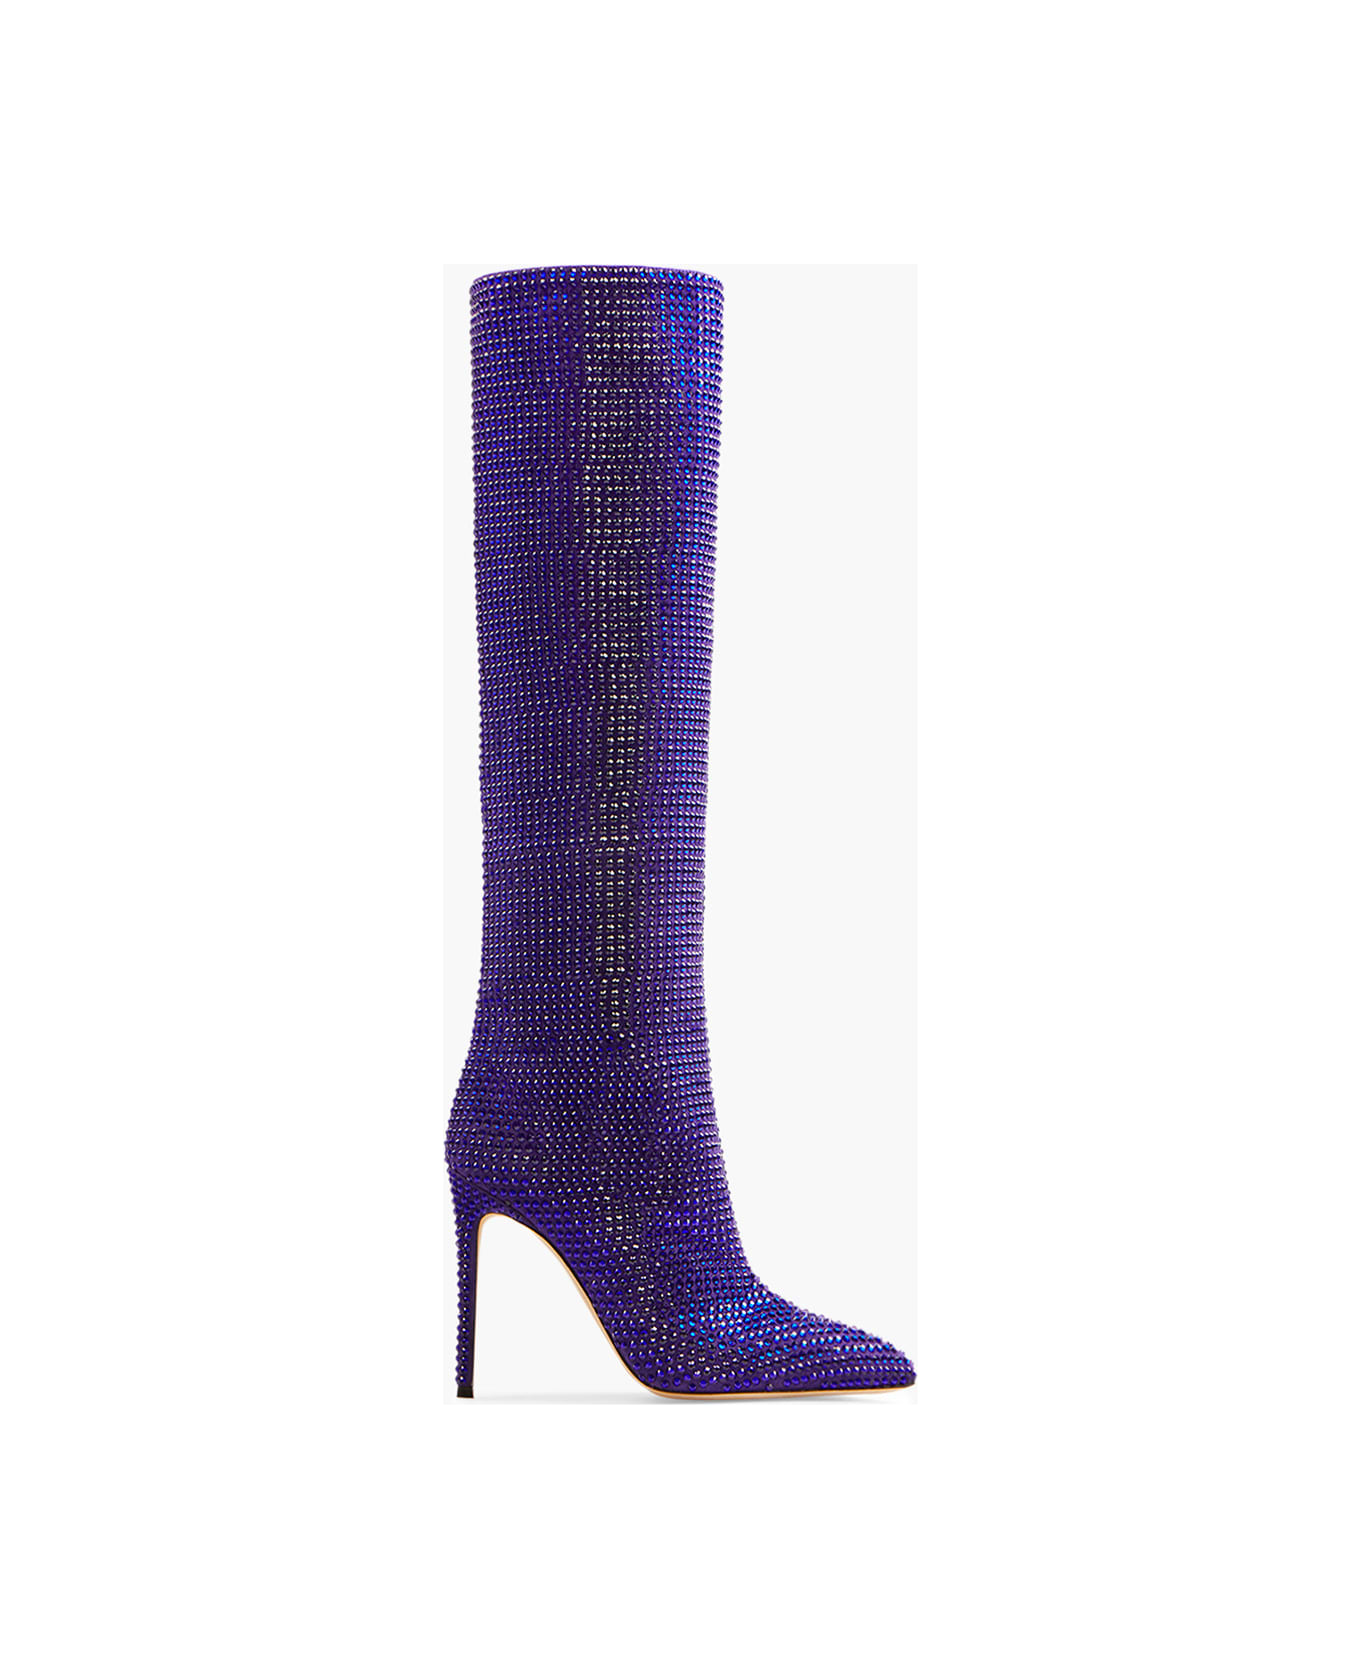 Paris Texas Holly Boots With Crystals - AMETHYST